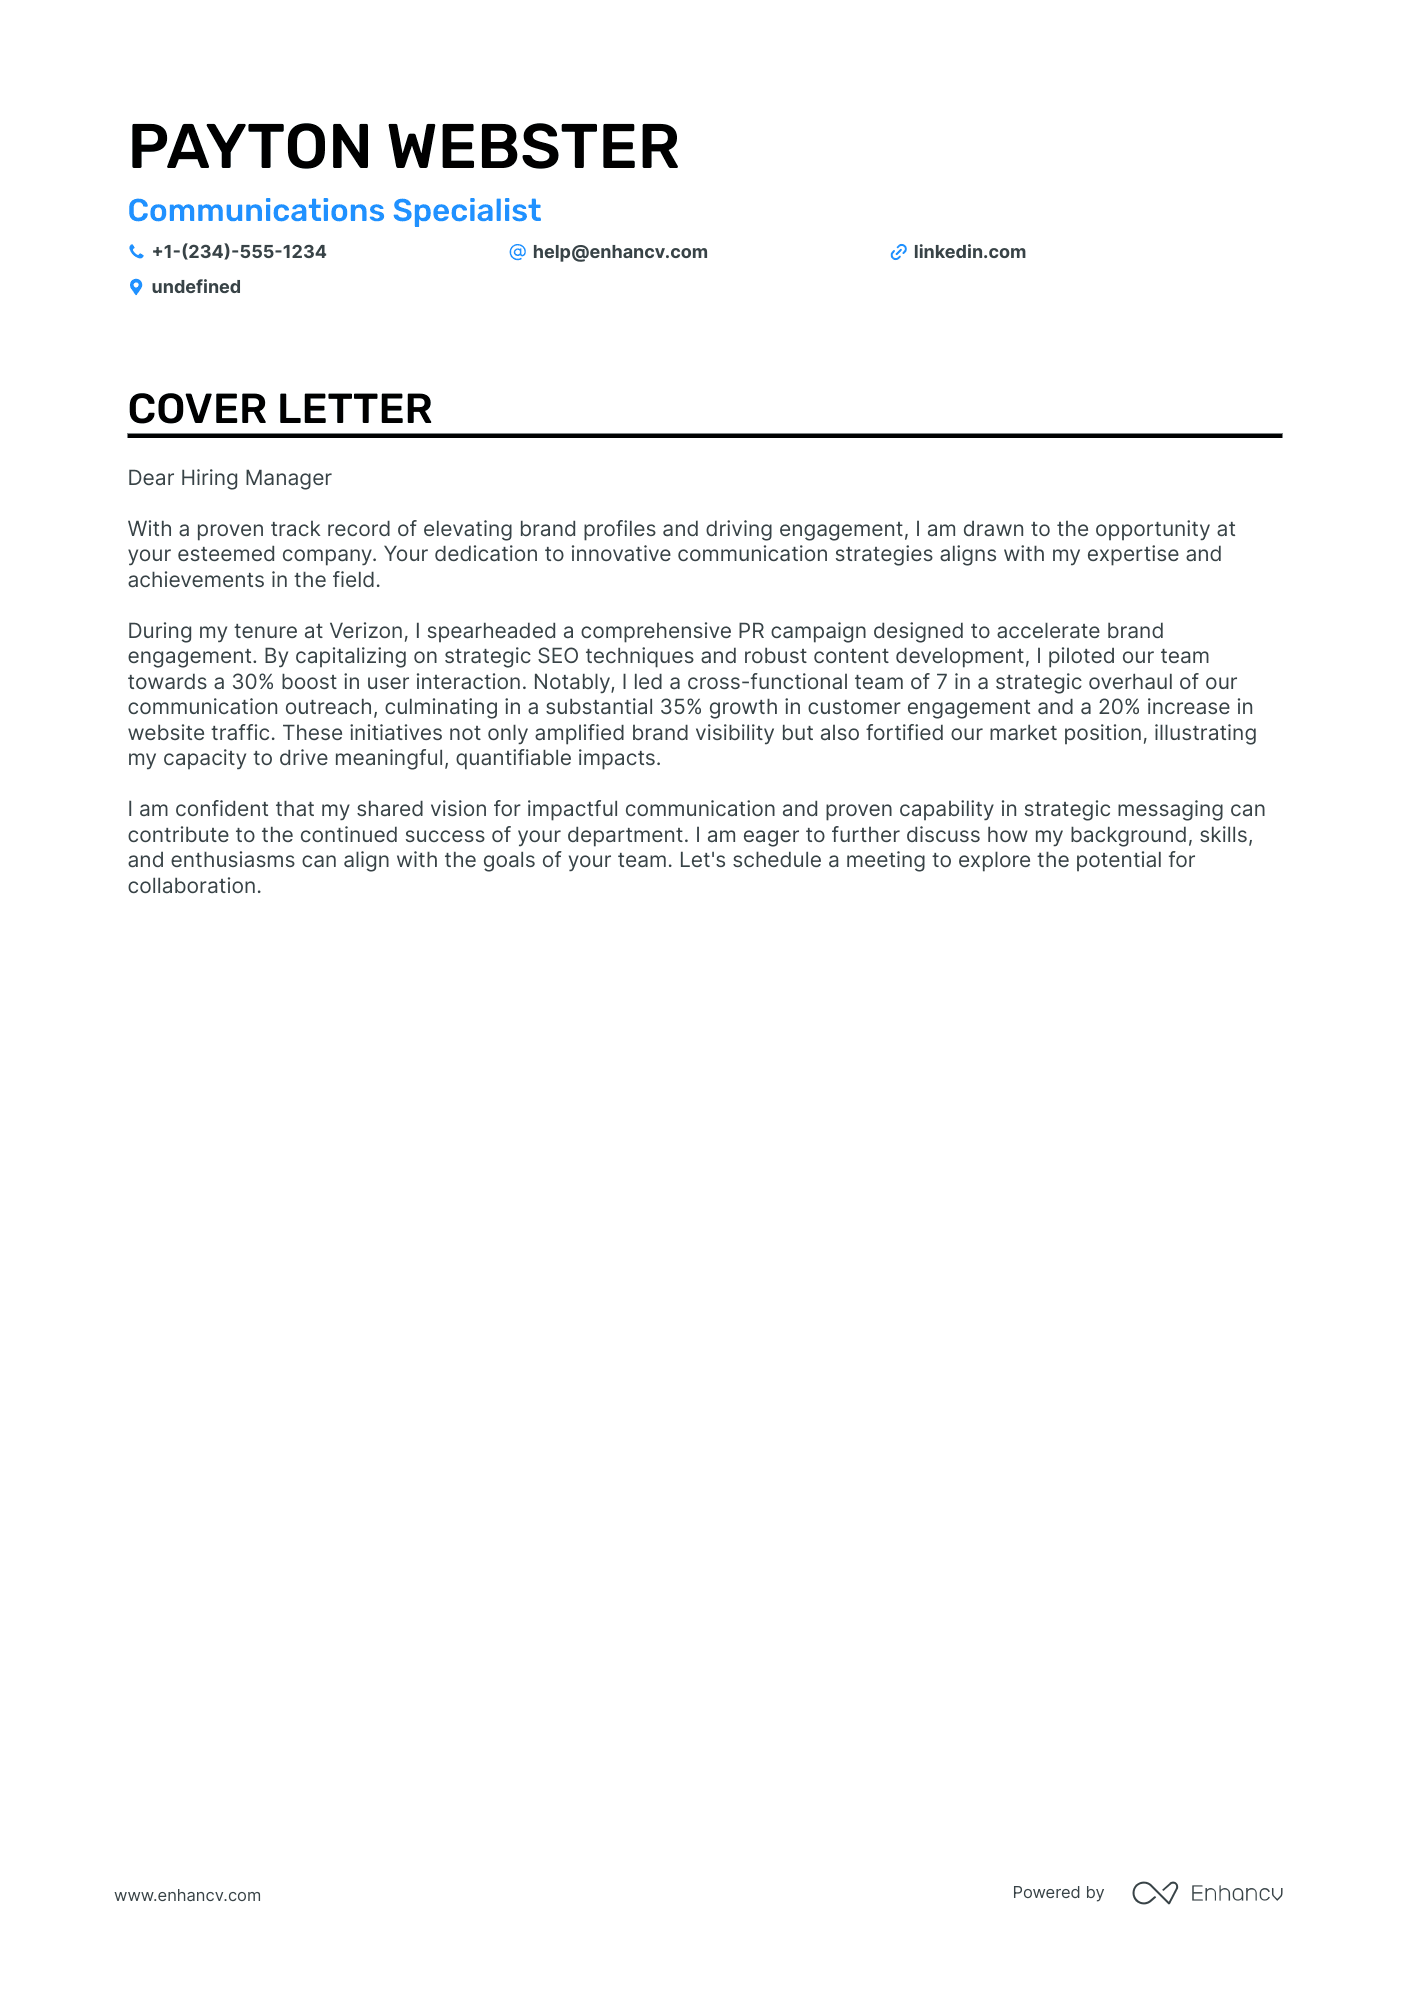 Communications Specialist cover letter